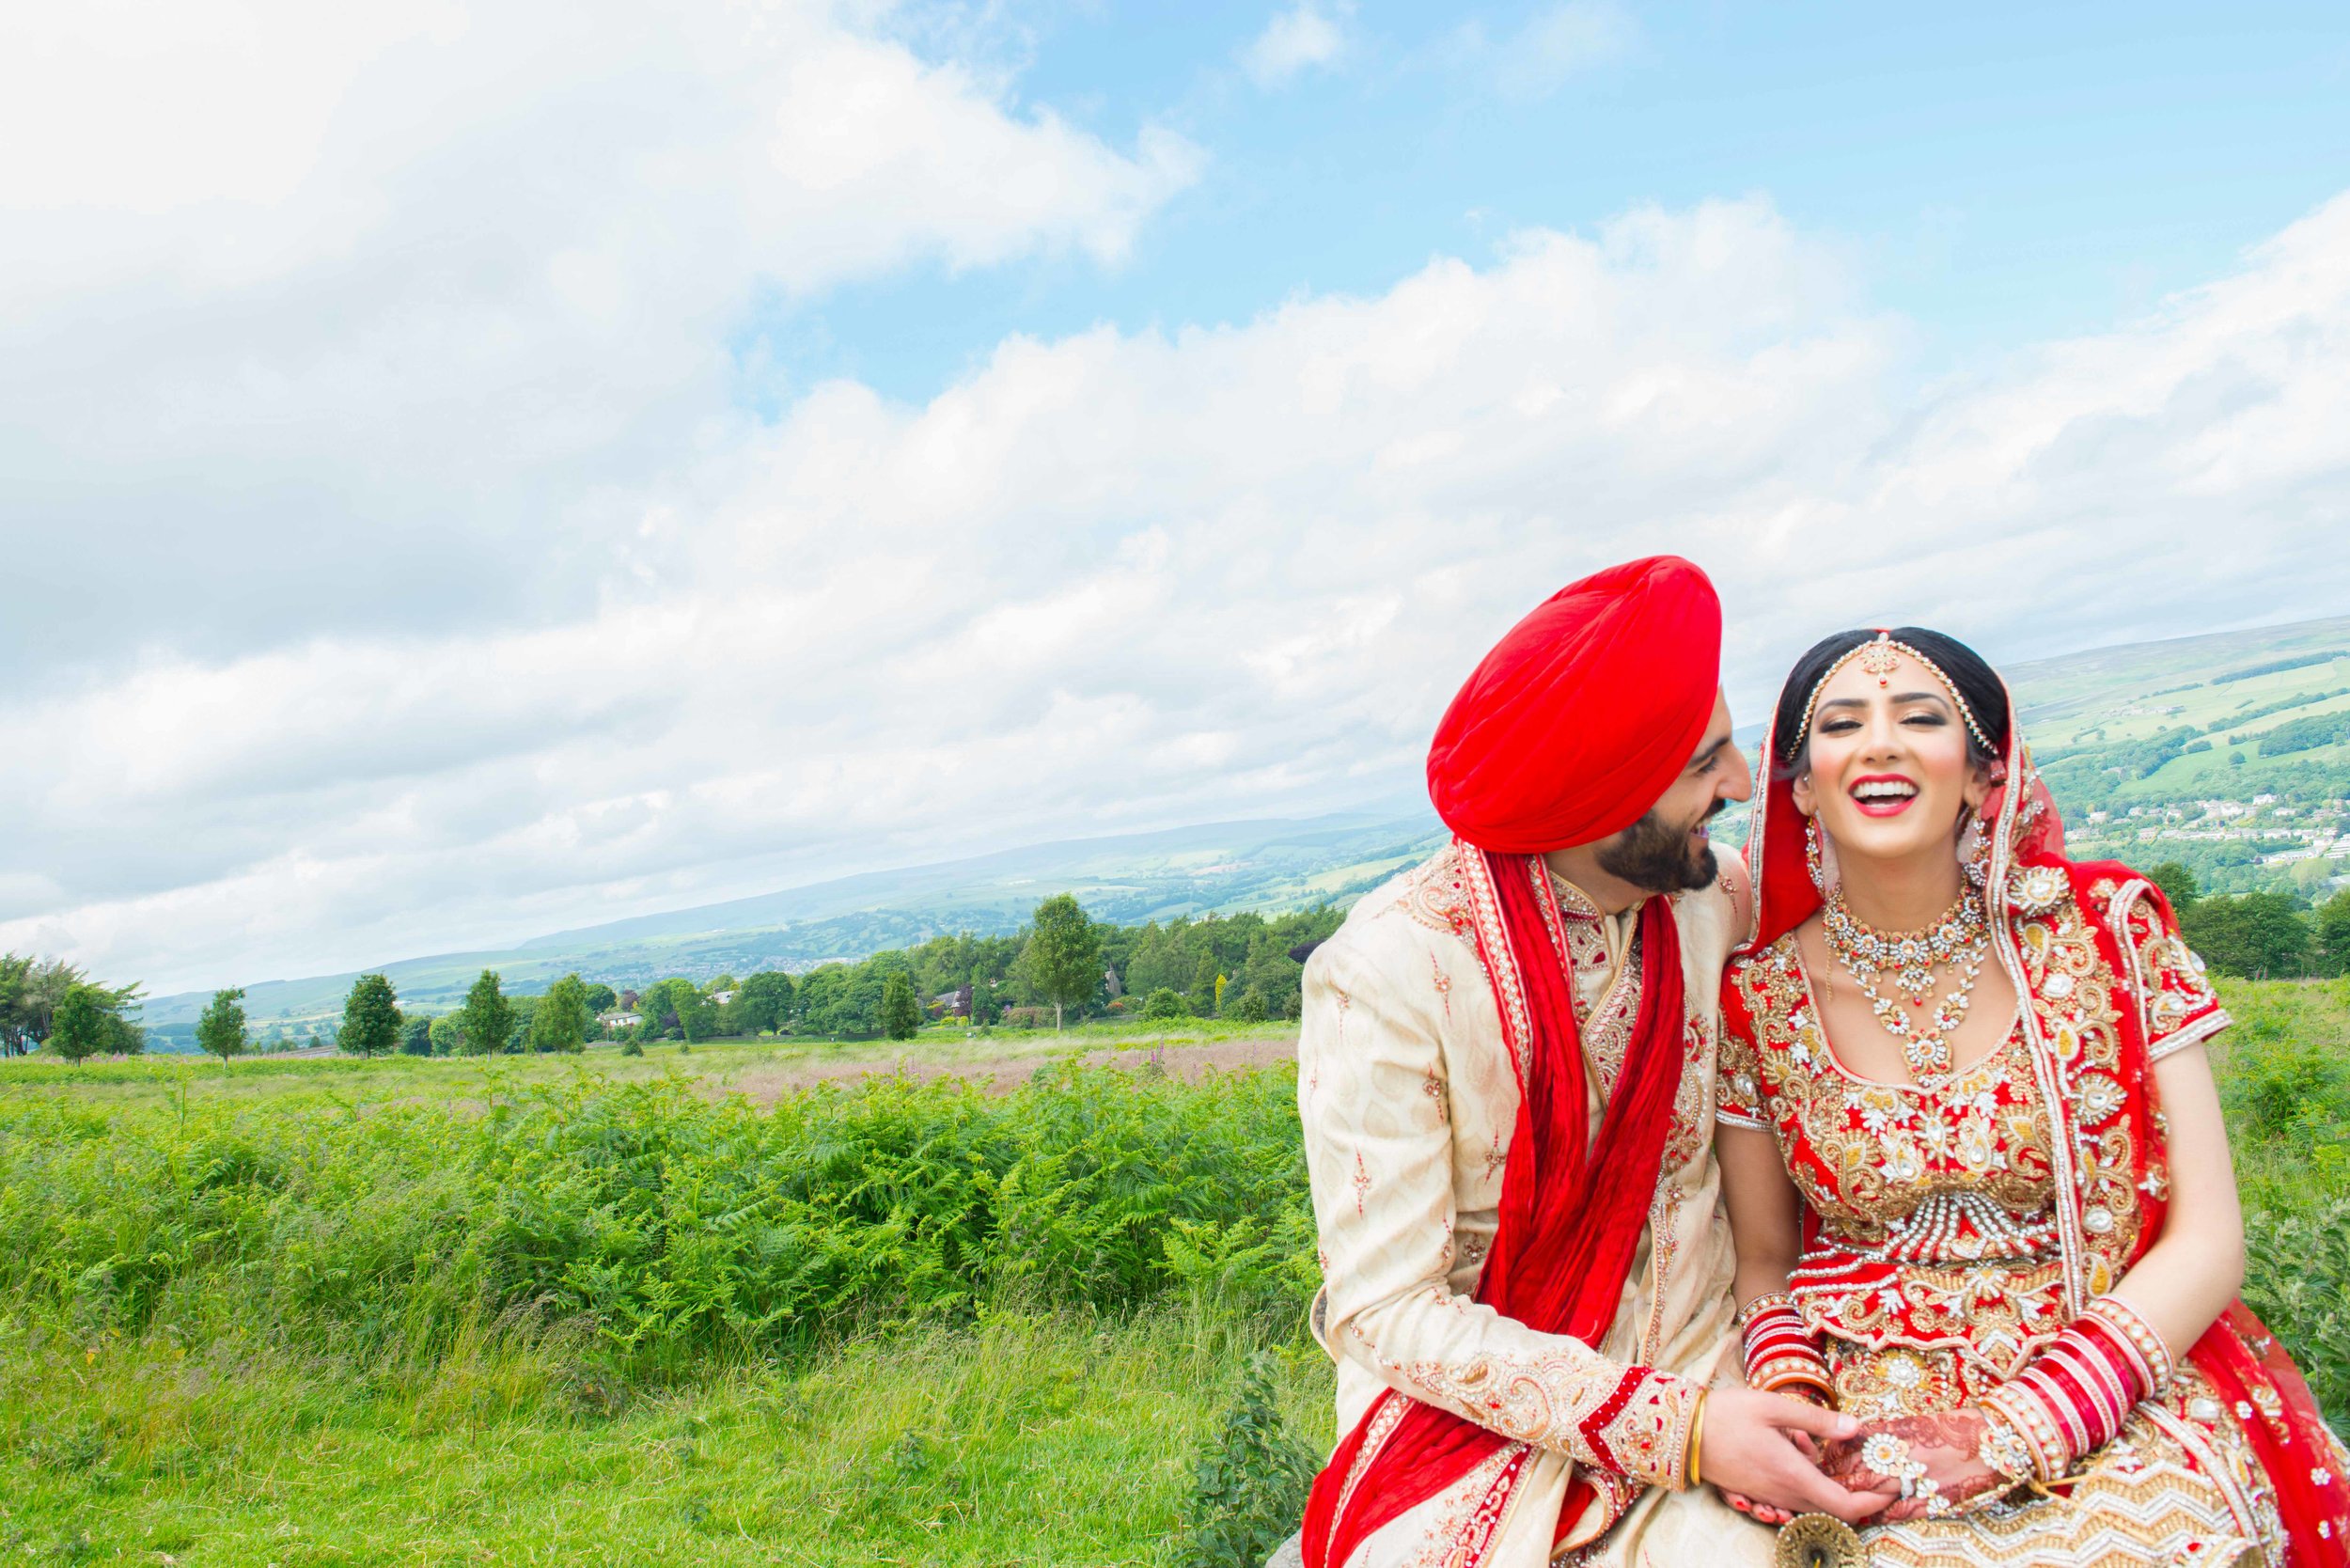 Asian Weddings Gallery — Your Site Title